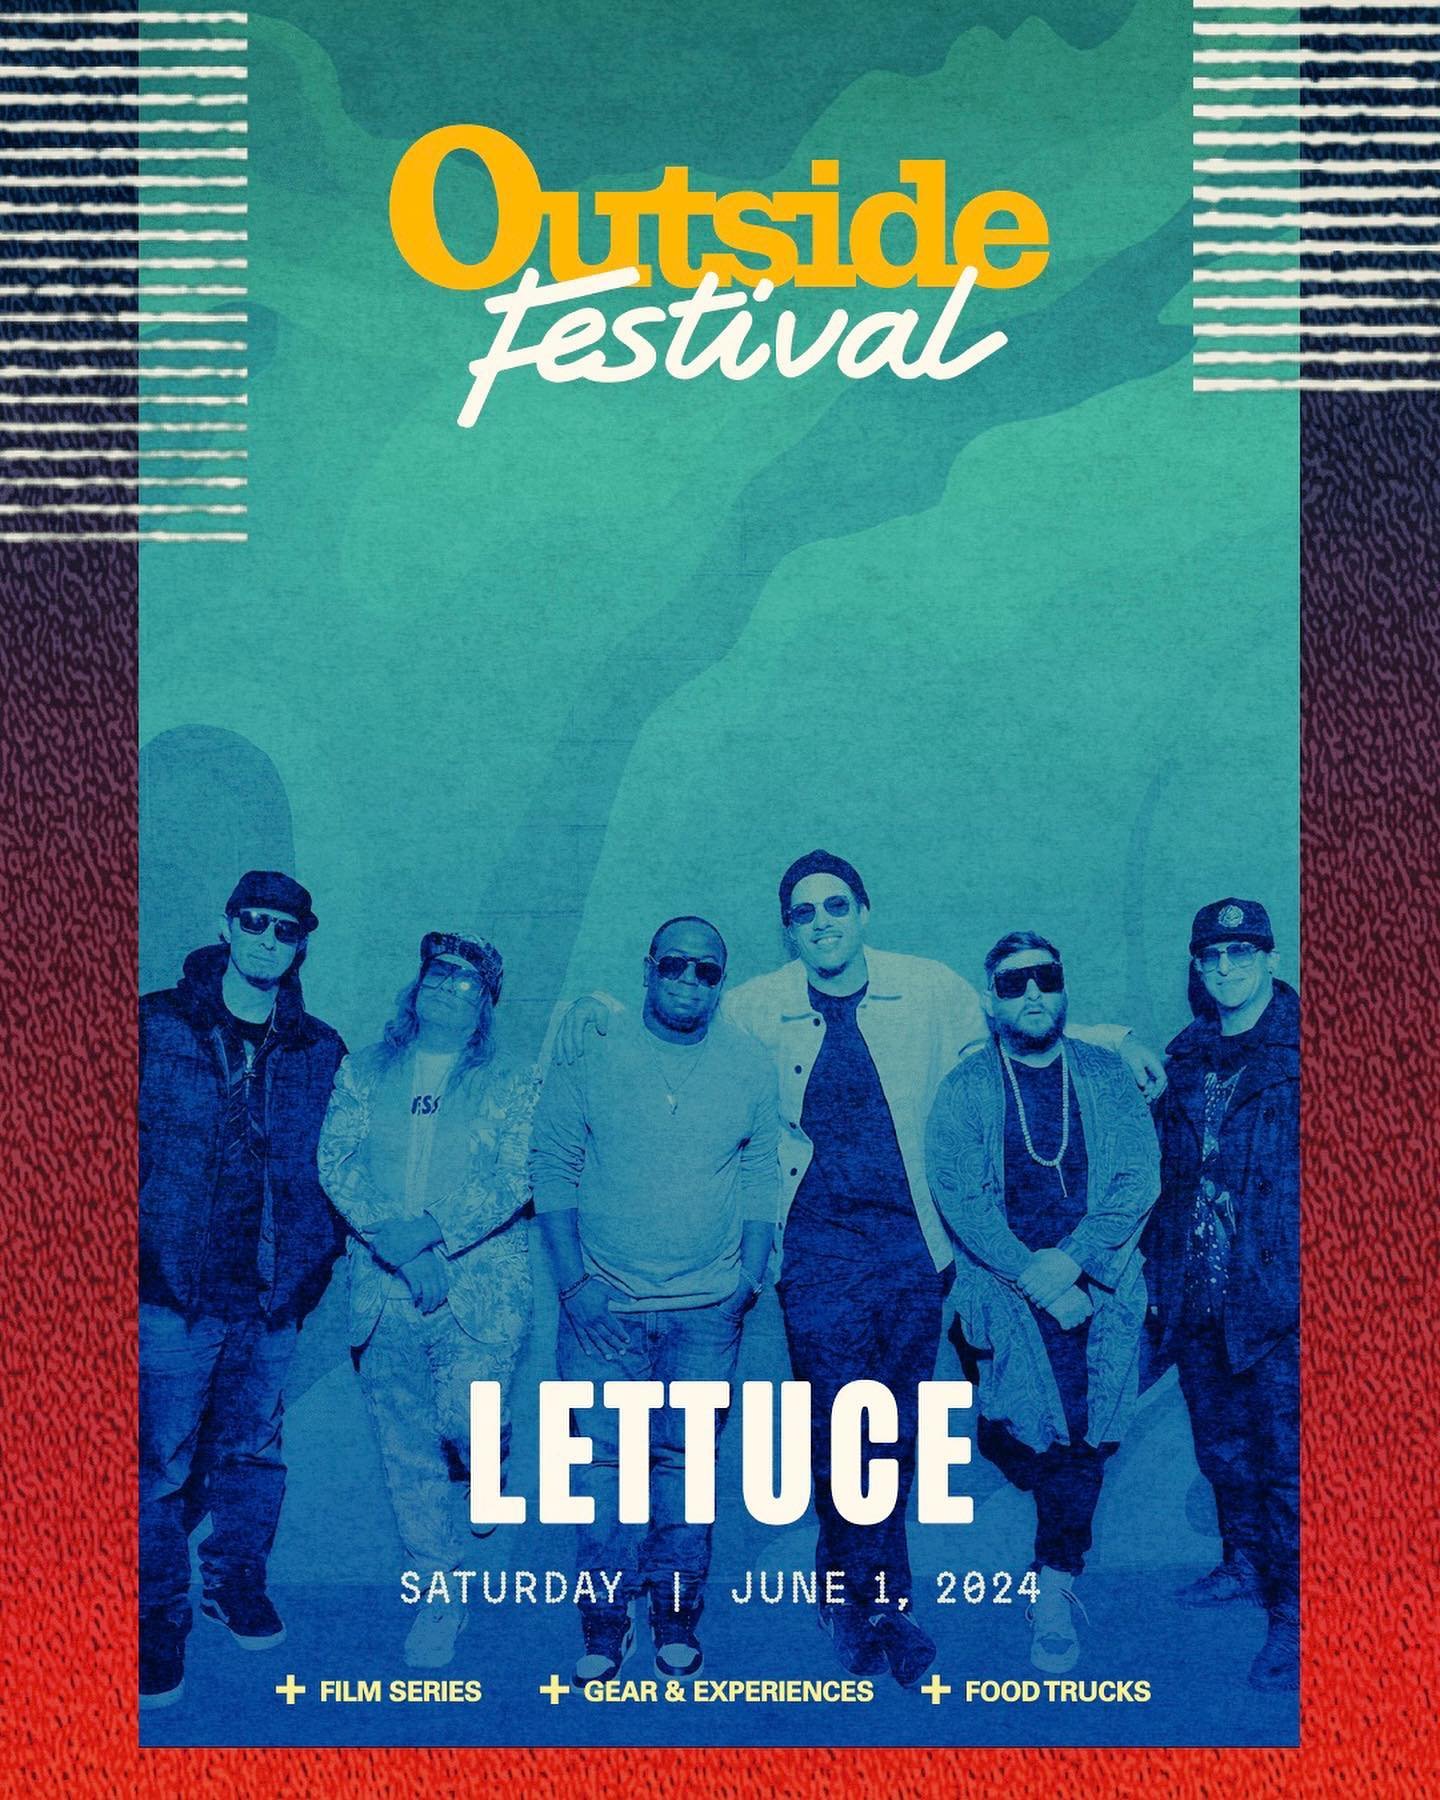 COLORADOOO 🥬☀️ We&rsquo;re ready to rage with you June 1st at Outside Festival in DENVER!! Swipe to check out the killer lineup for this fest and get your tickets now!!

www.lettucefunk.com/tour